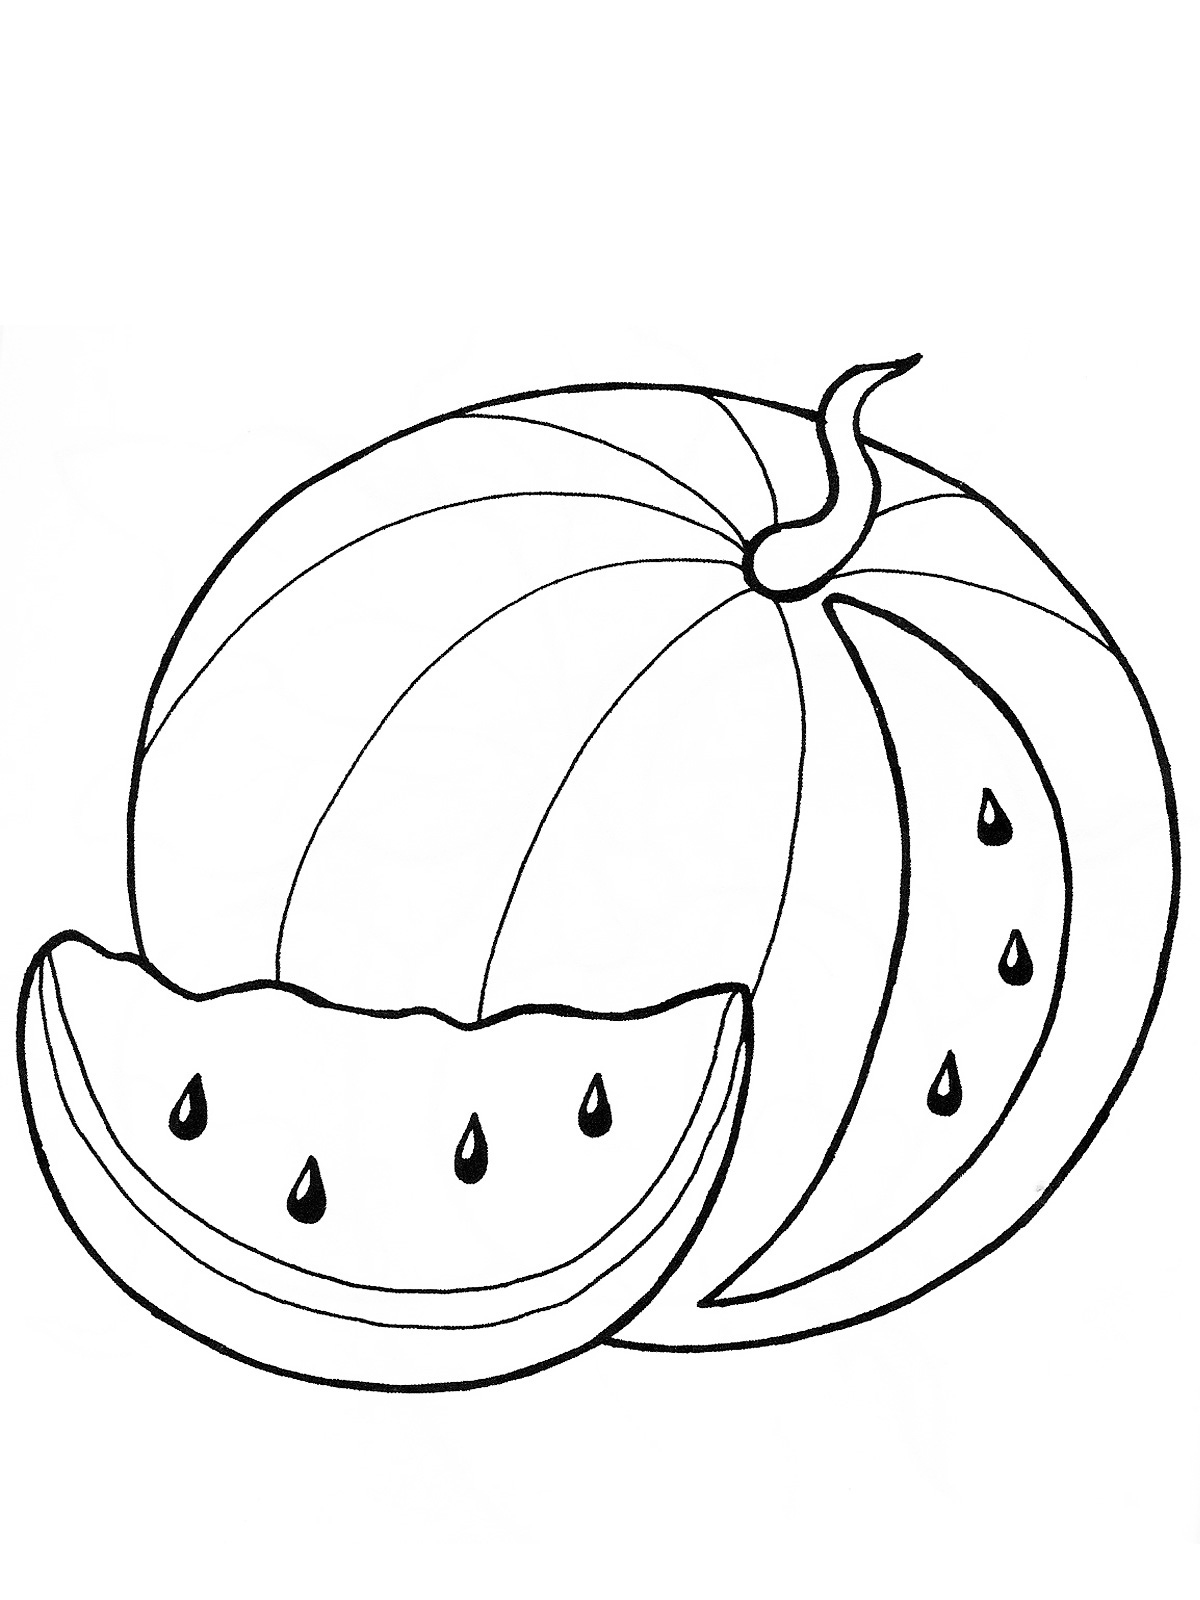 watermelon-coloring-pages-to-download-and-print-for-free-motherhood